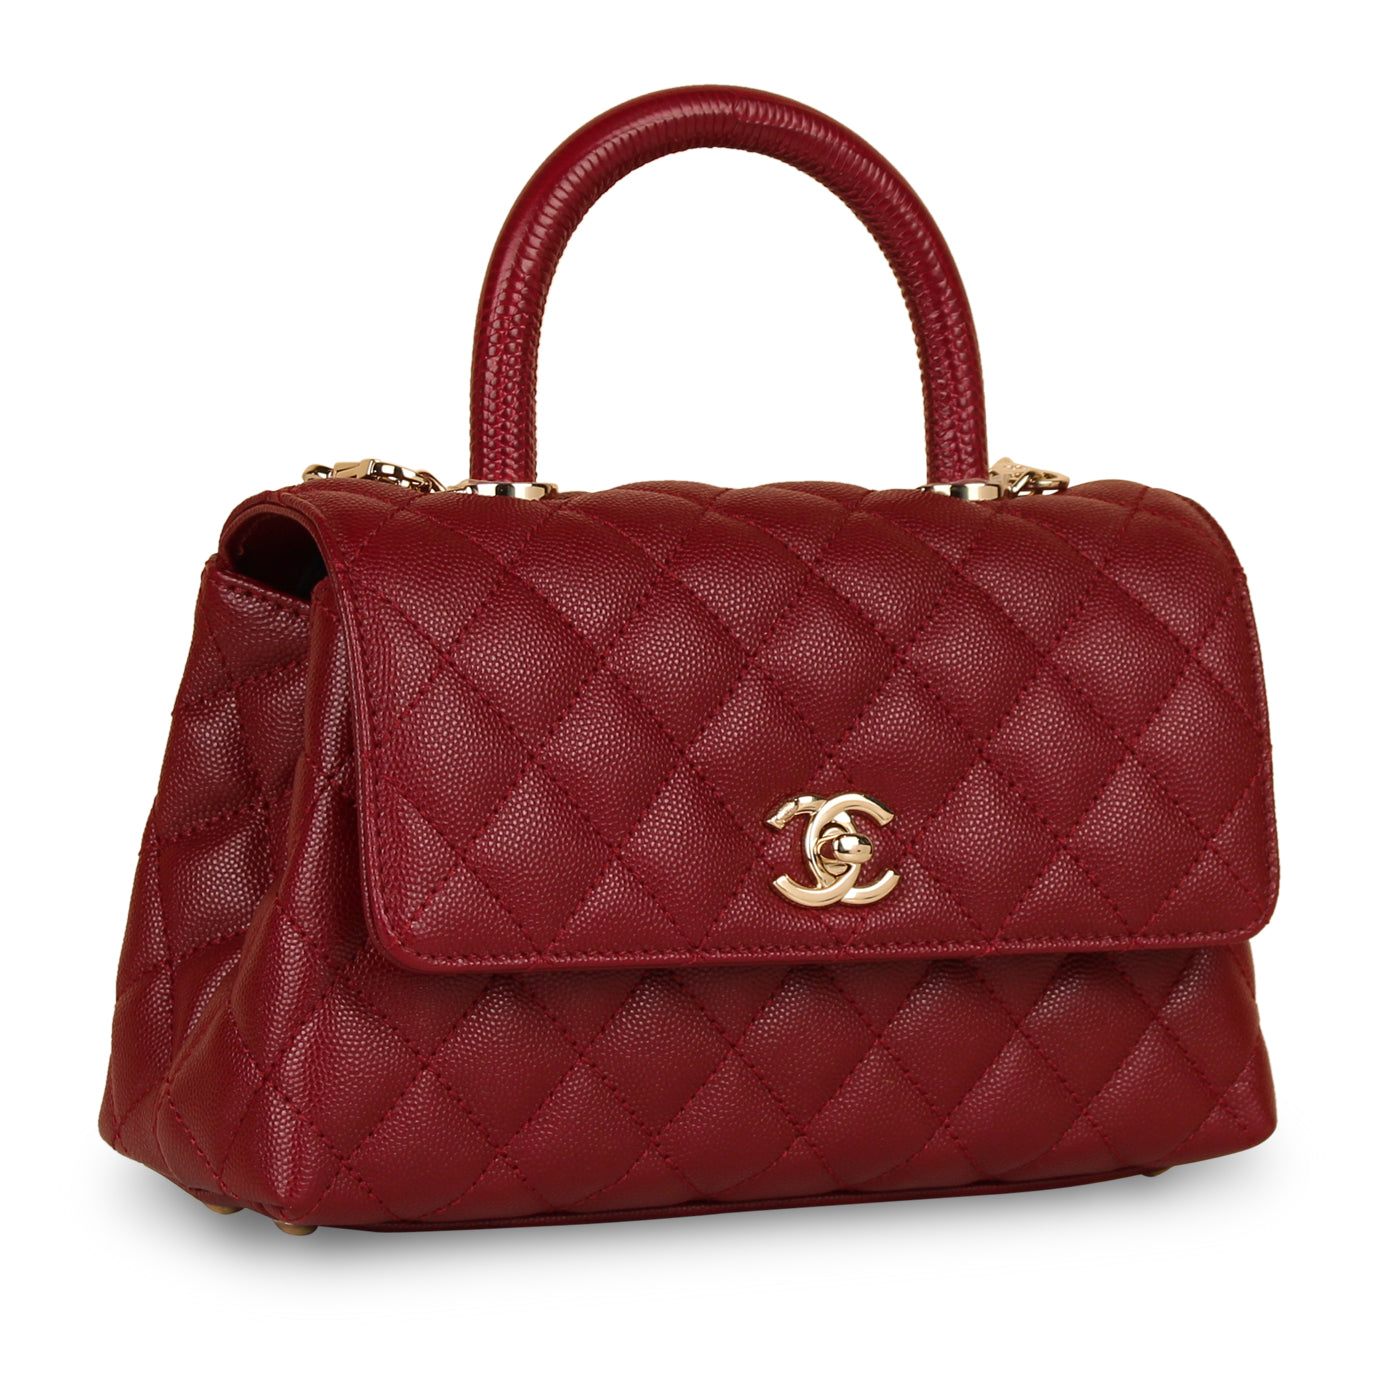 Chanel - Coco Handle - Red - Brand New | Bagista